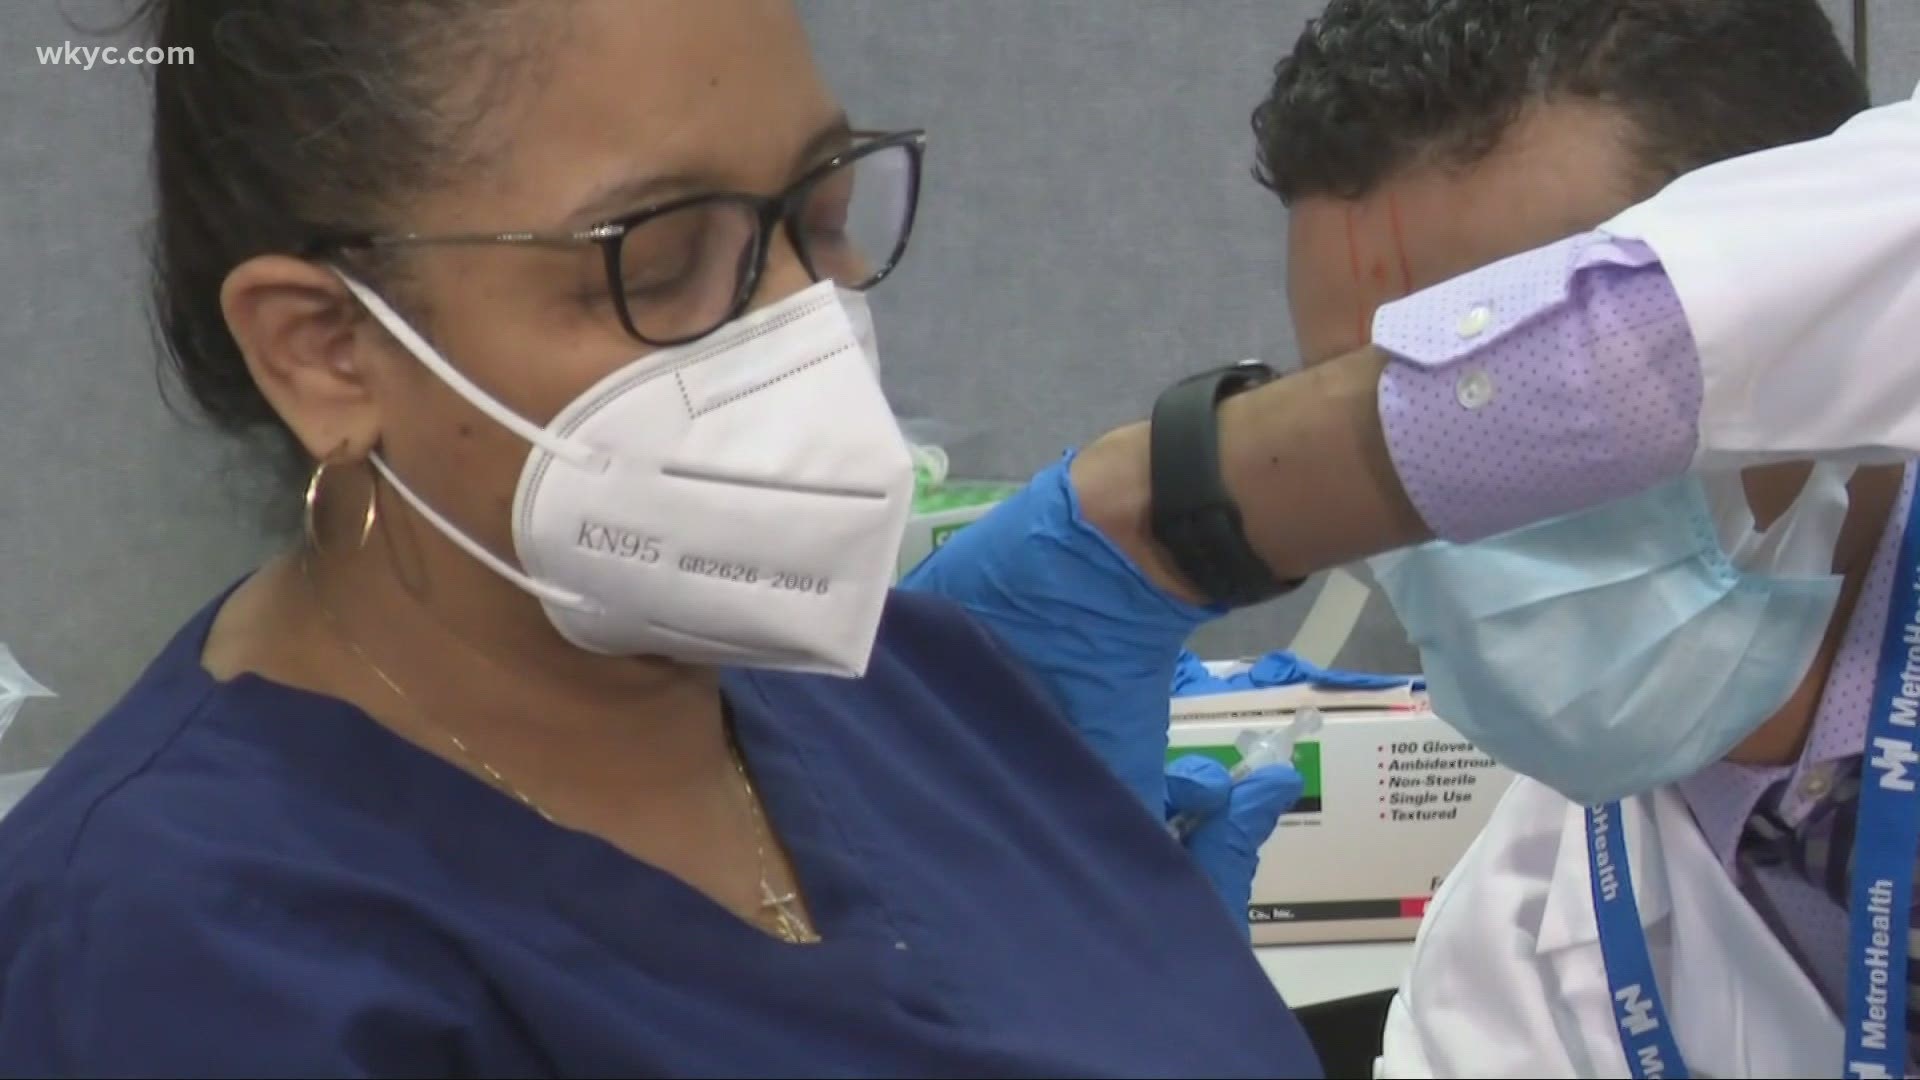 It was a day we've been waiting for since the pandemic began. Local healthcare workers began to receive the COVID-19 vaccine. Laura Caso has more.